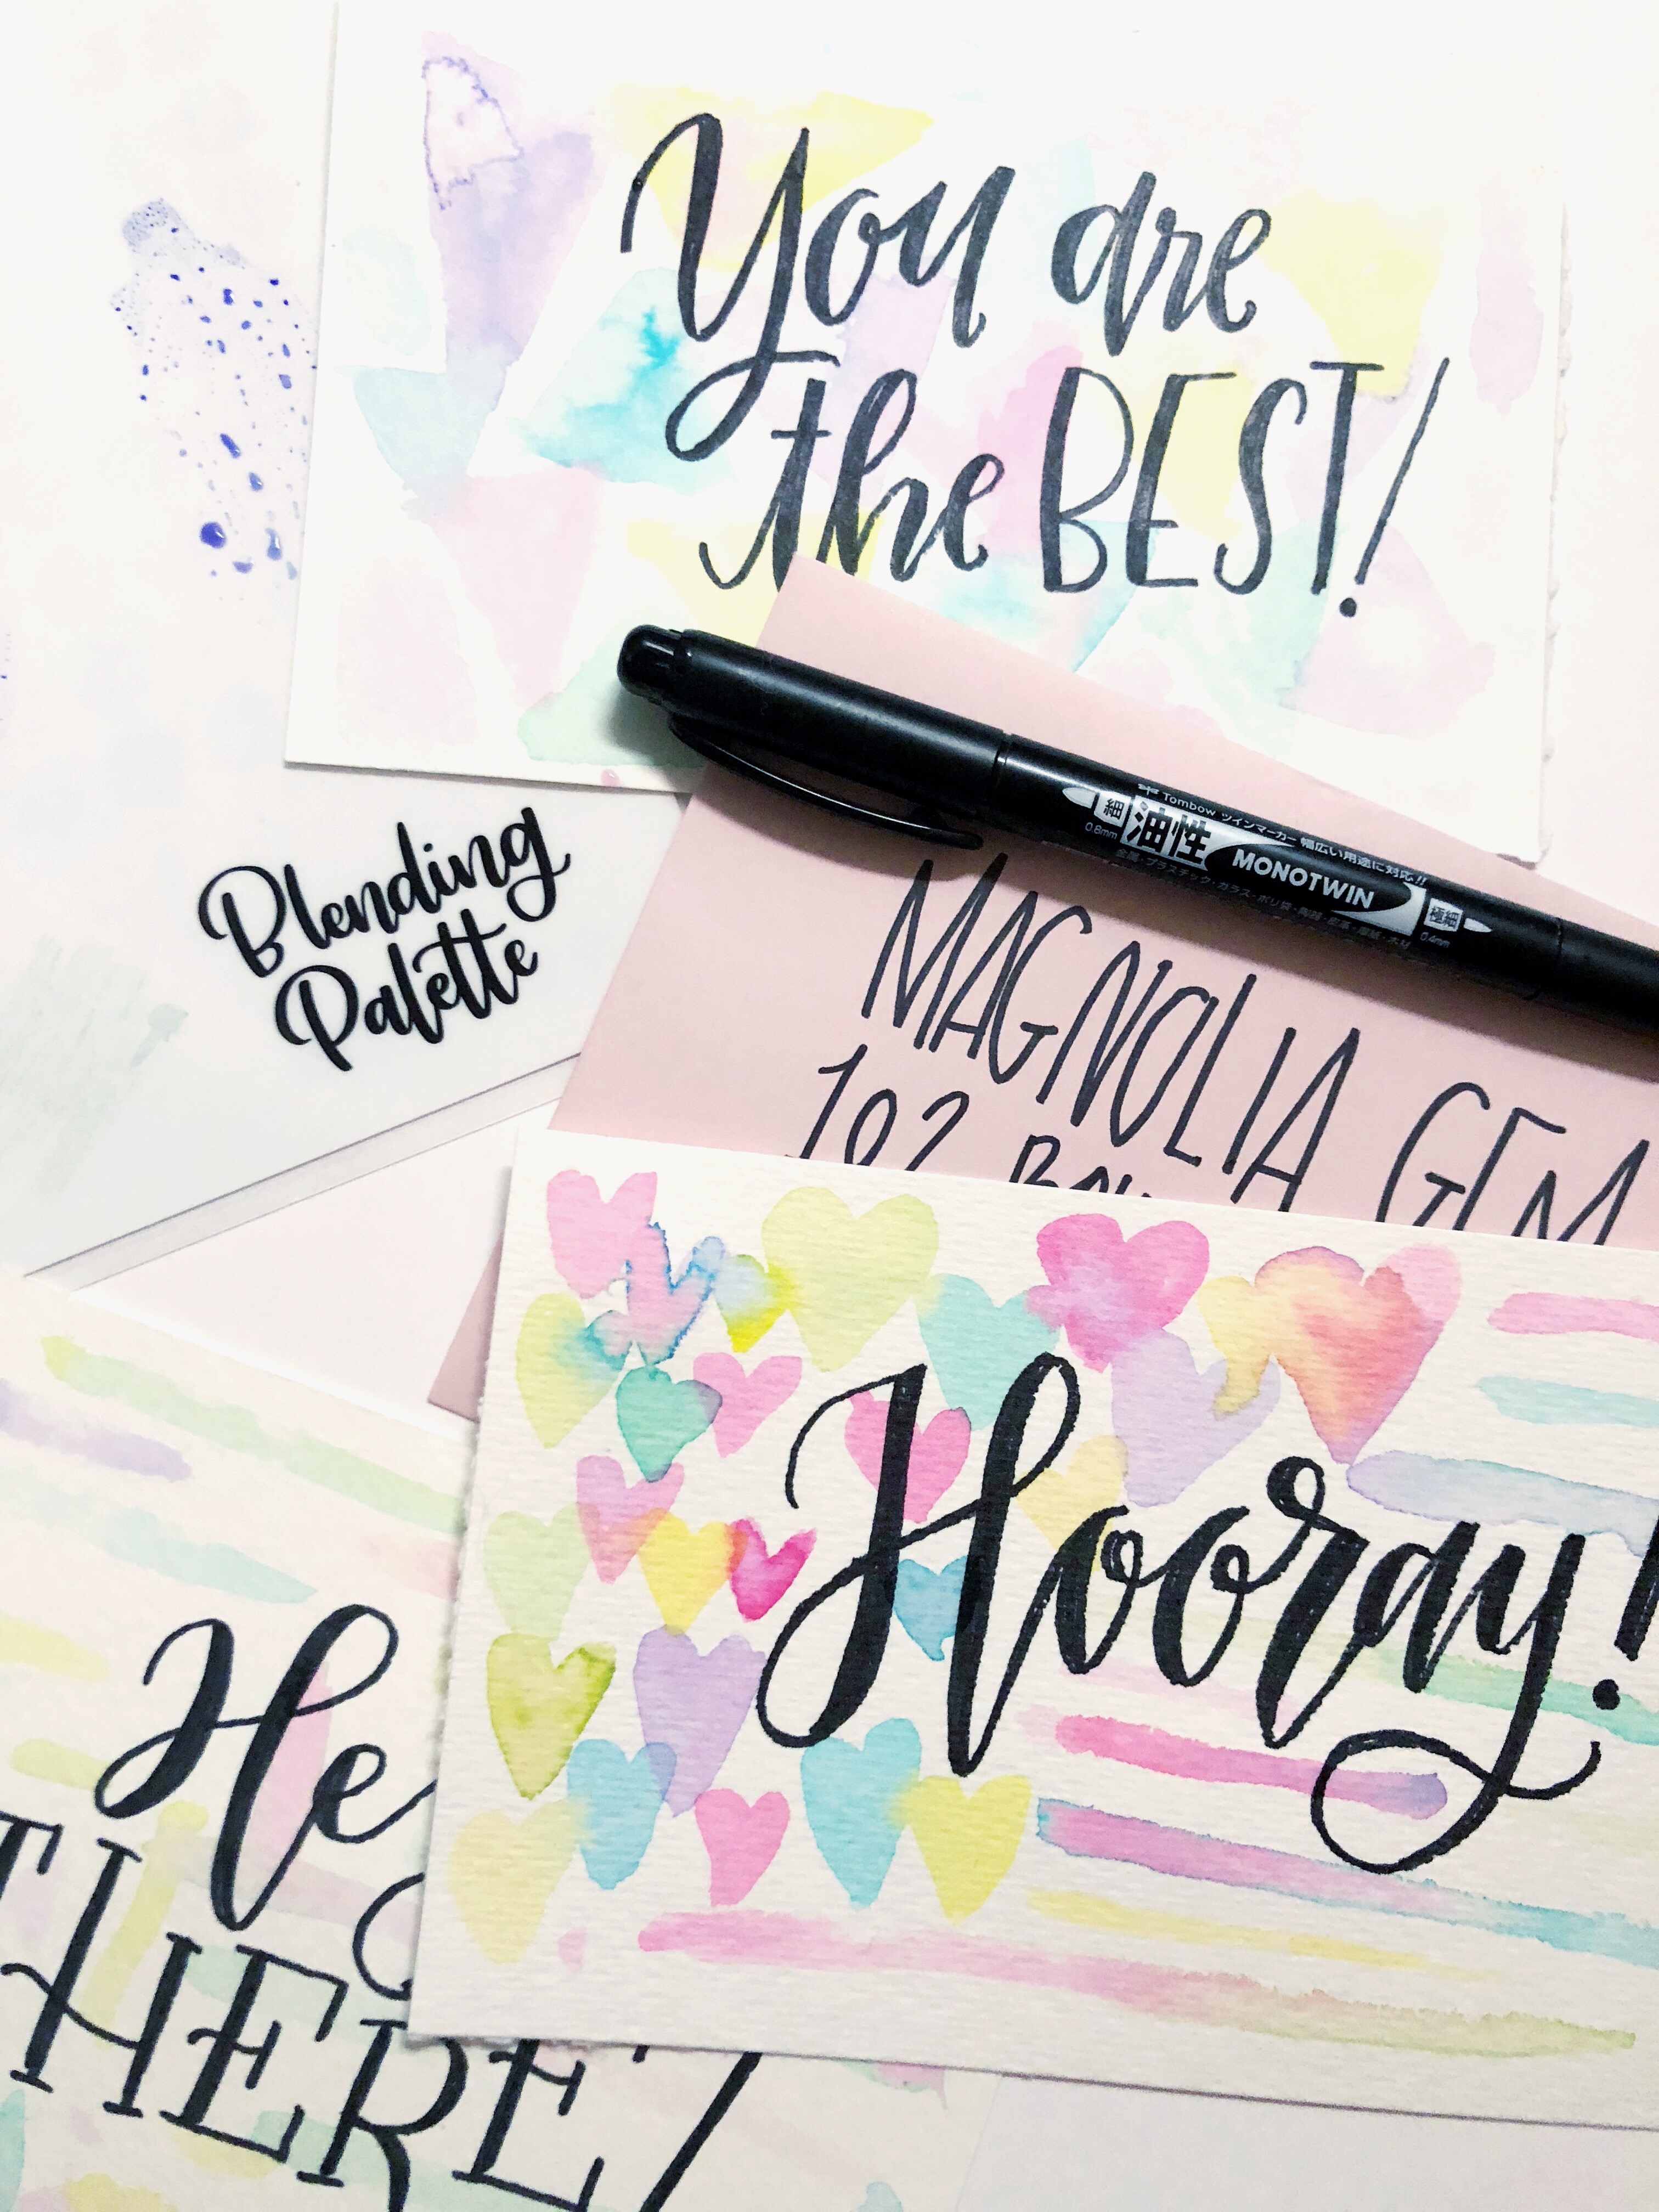 Lauren Fitzmaurice of Renmade Calligraphy shows a fun and easy technique using the awesome new XL Blending Palette from Tombow USA. For more information about the products used in this tutorial check out tombowusa.com.